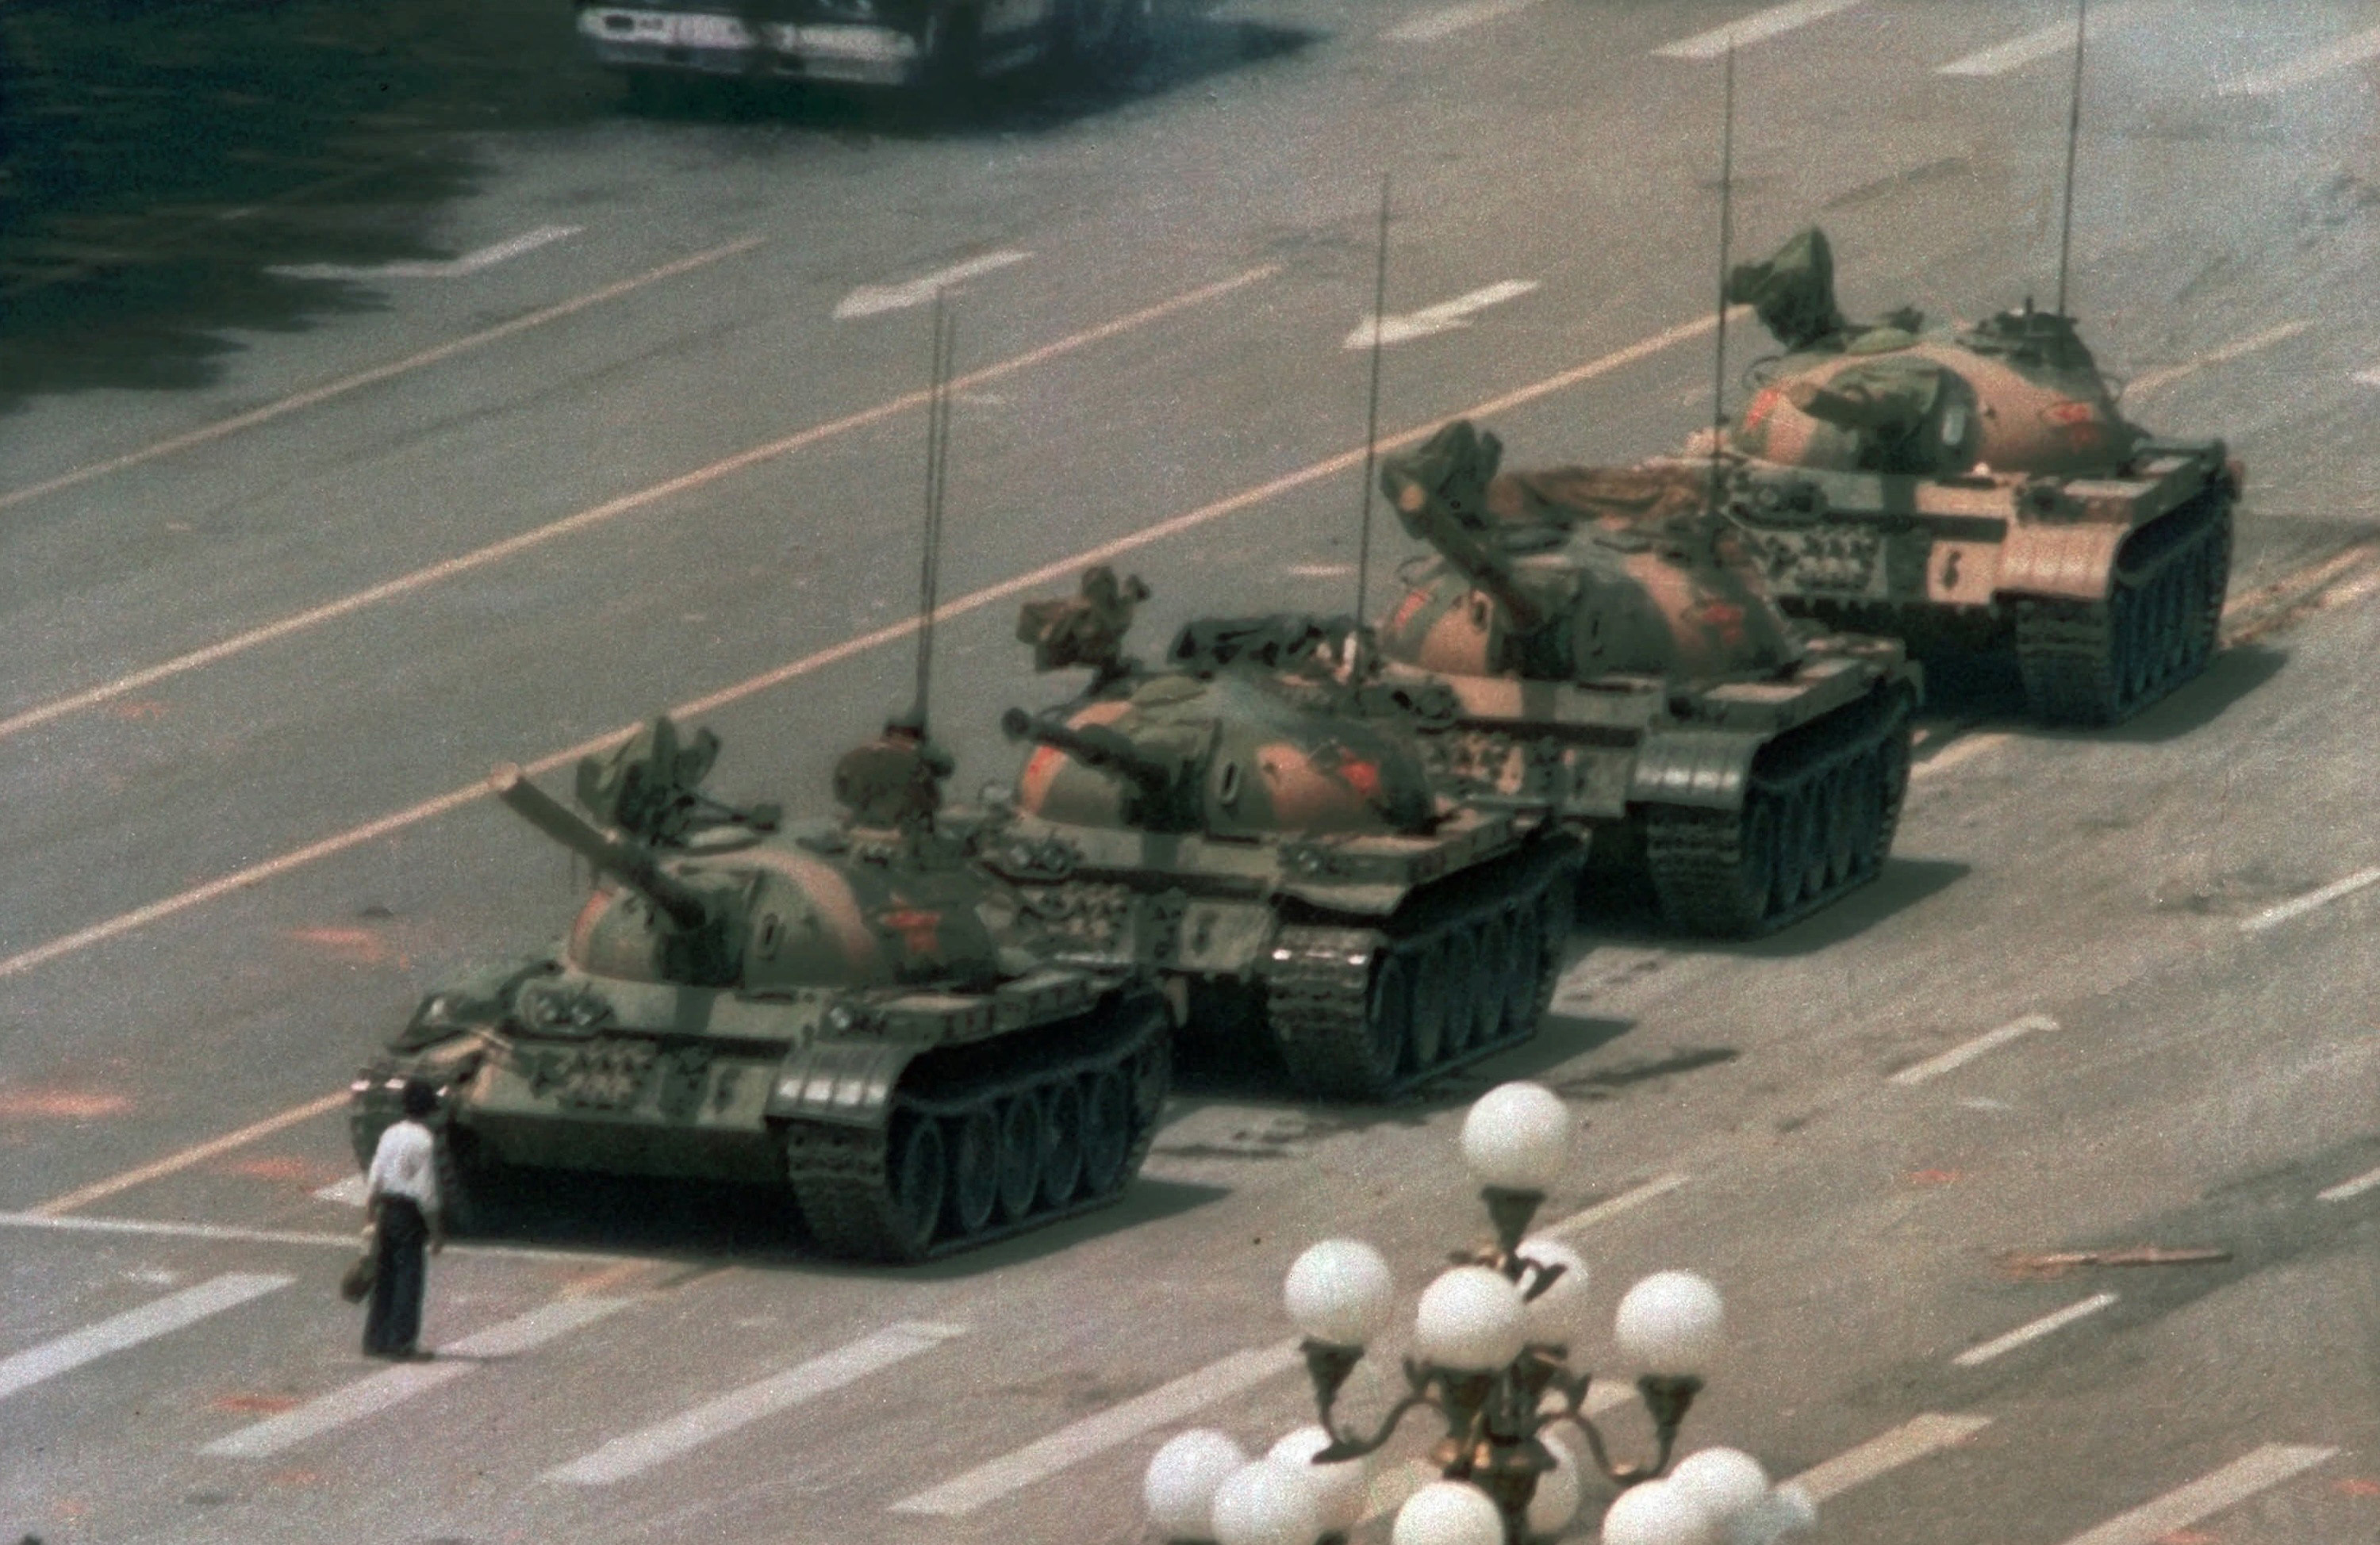 China on Tiananmen Square commemorations extends to Hong